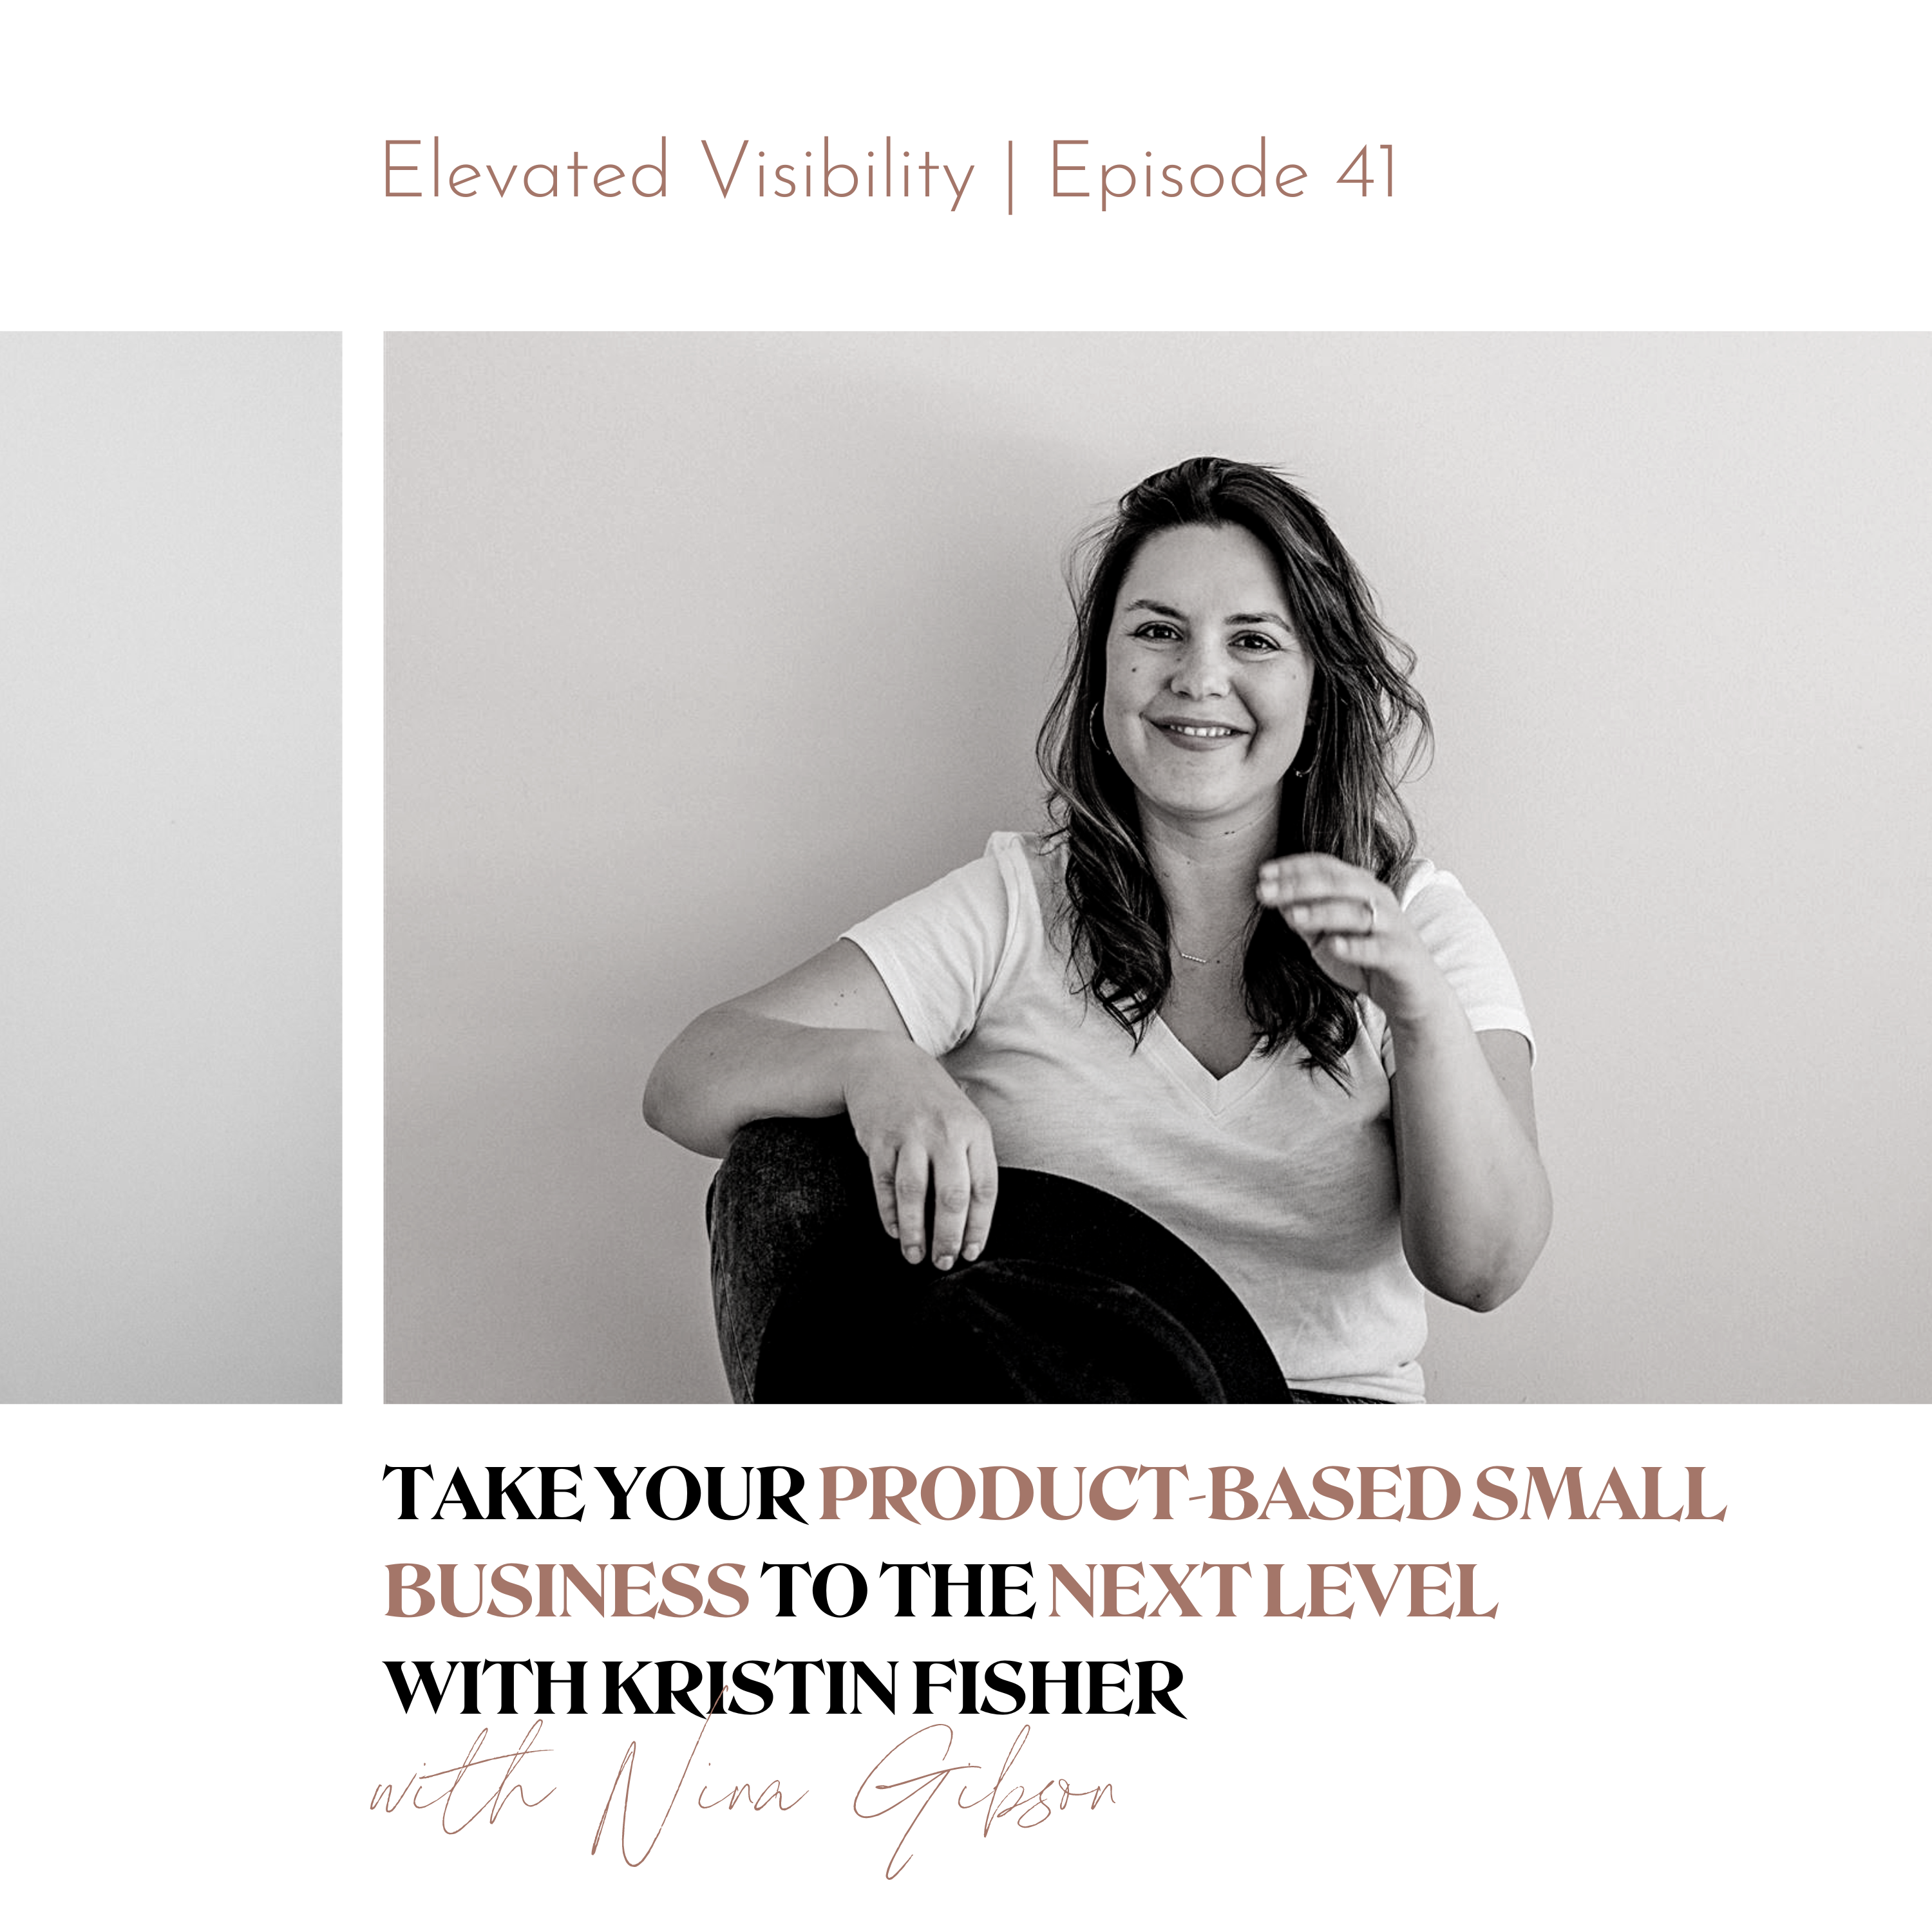 Elevated Visibility Podcast Episode 41 Take Your Product-based Small Business to the Next Level with Kristin Fisher featured image